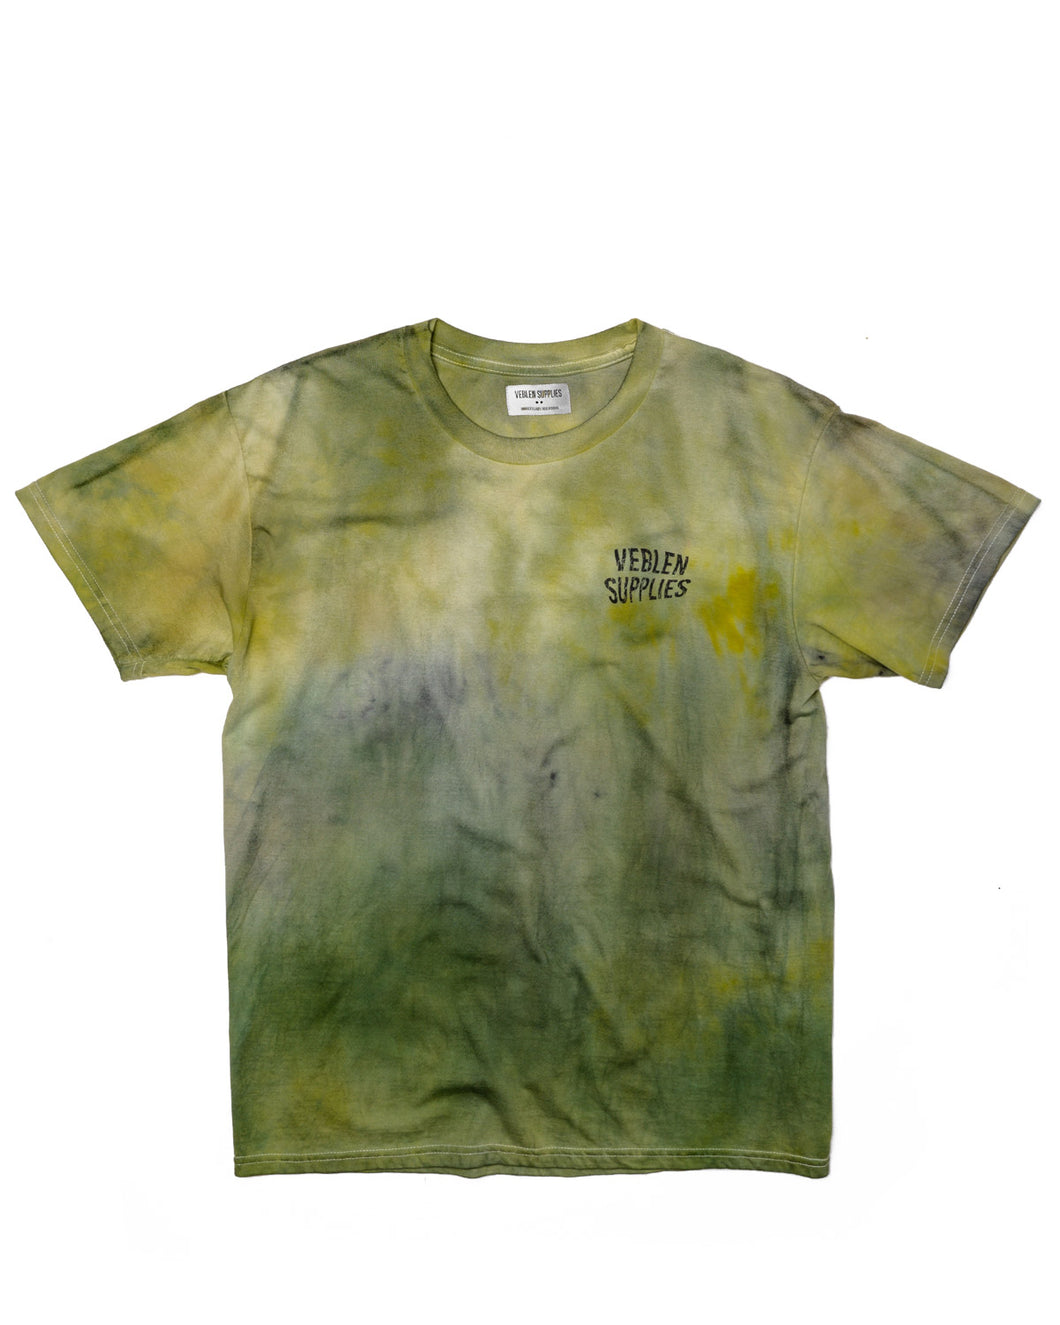 VARIEGATED T-SHIRT COL 2